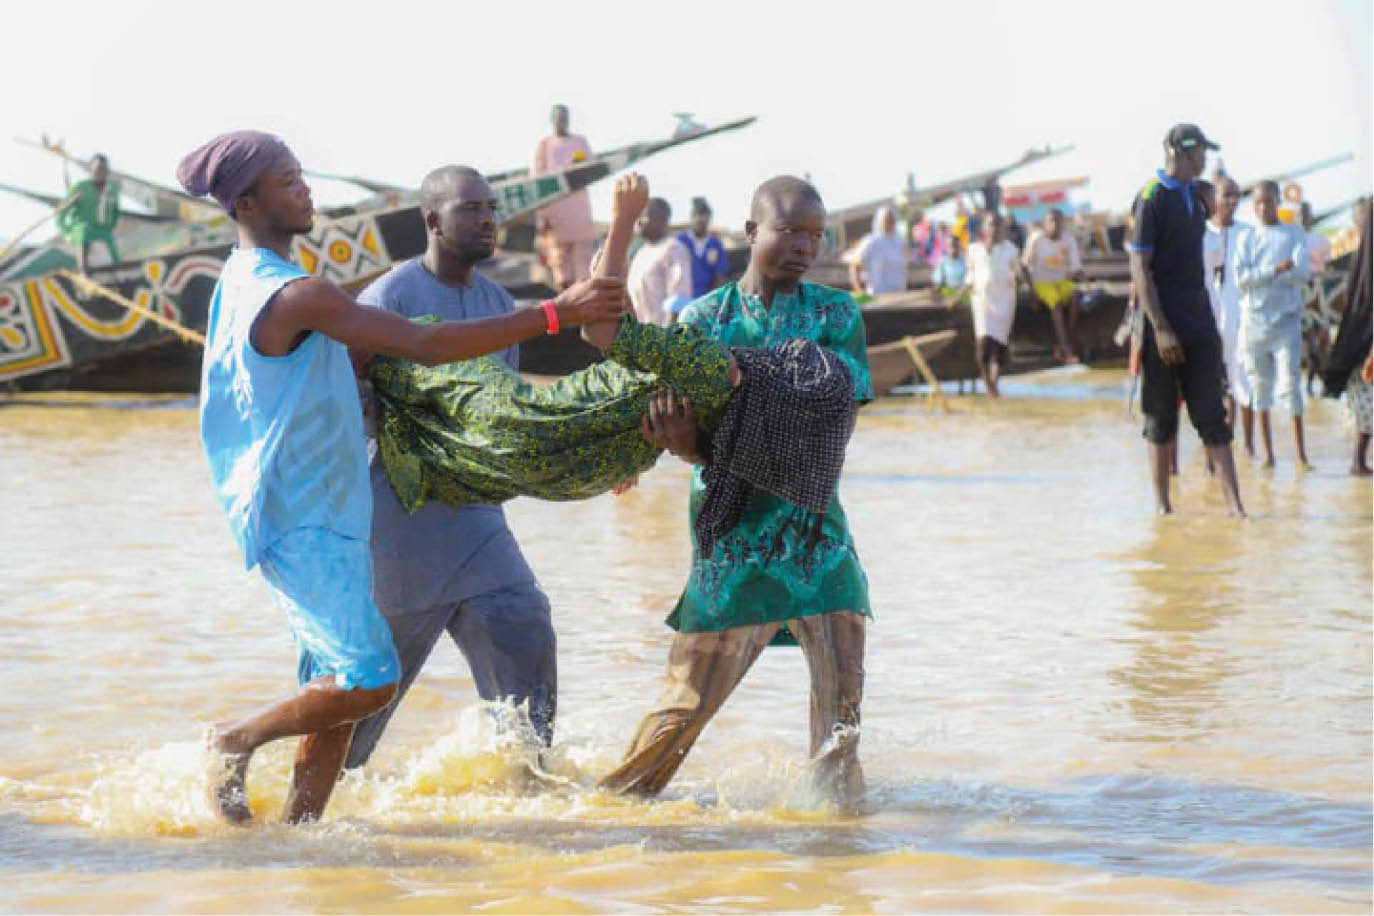 Boat Mishap: 76 Confirmed Dead, ATBOWATON Decries National Tragedy